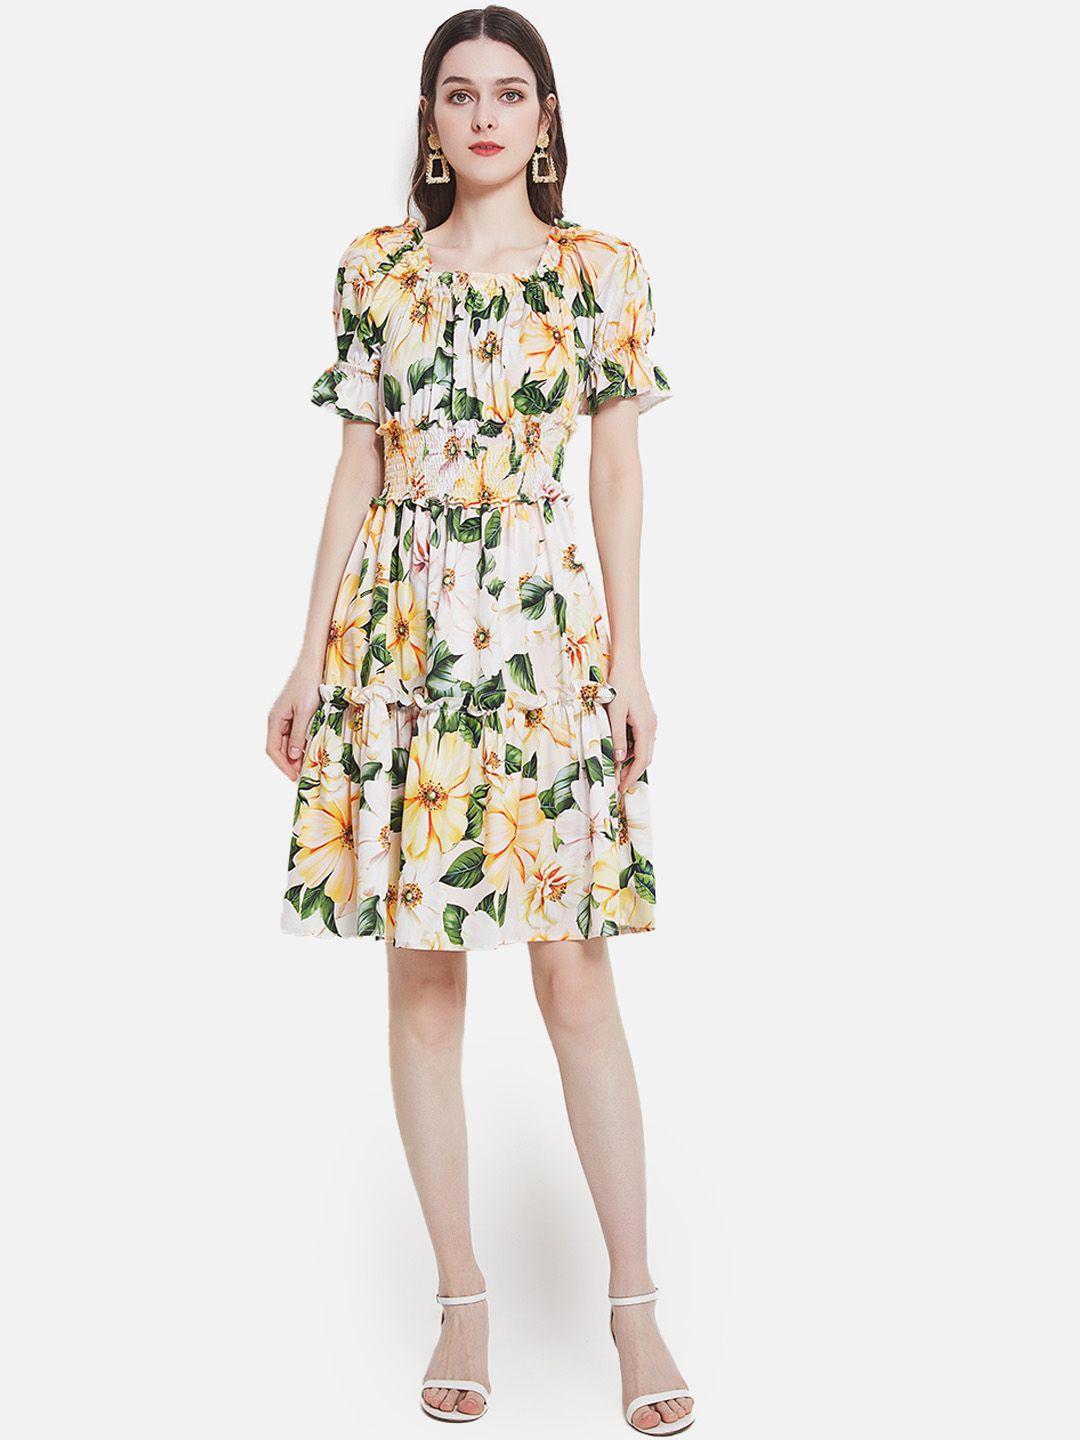 jc collection women yellow & green floral off-shoulder dress